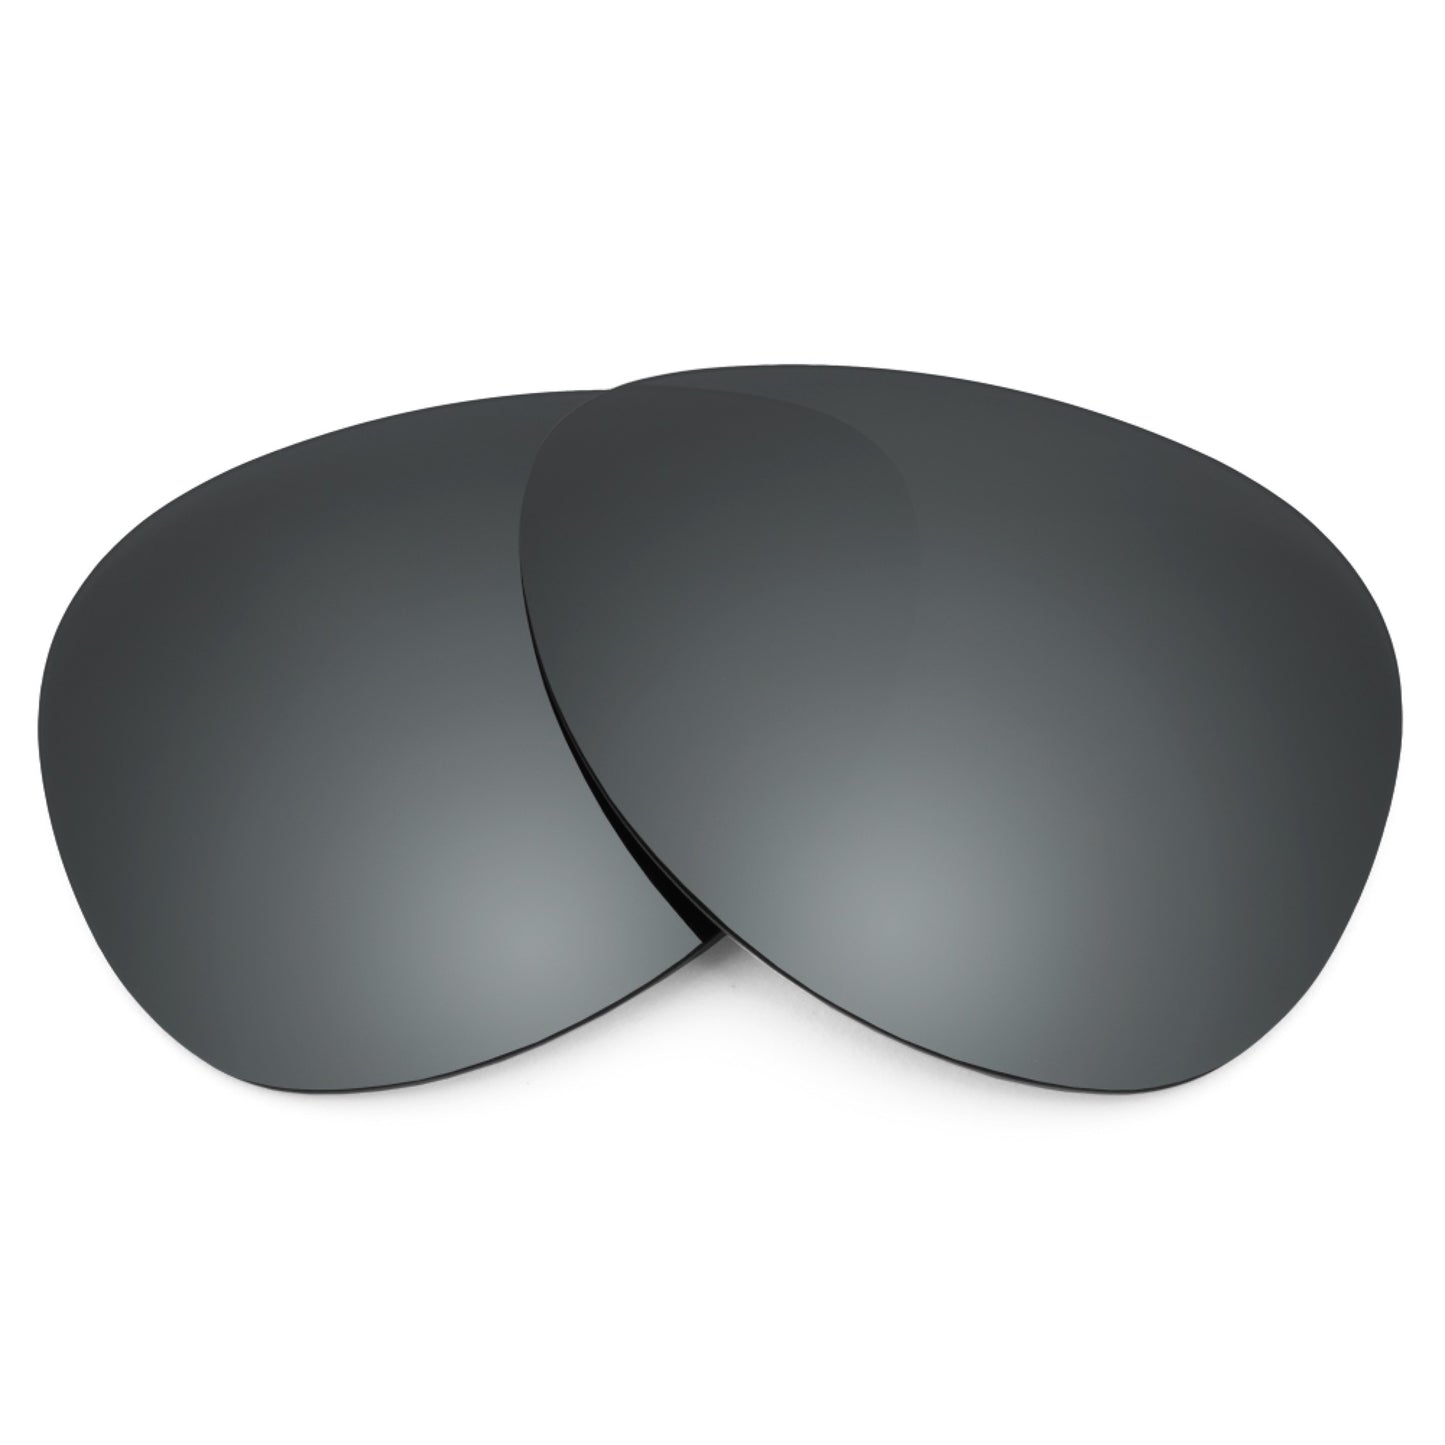 Revant replacement lenses for Ray-Ban Aviator Liteforce RB4180 58mm Non-Polarized Black Chrome